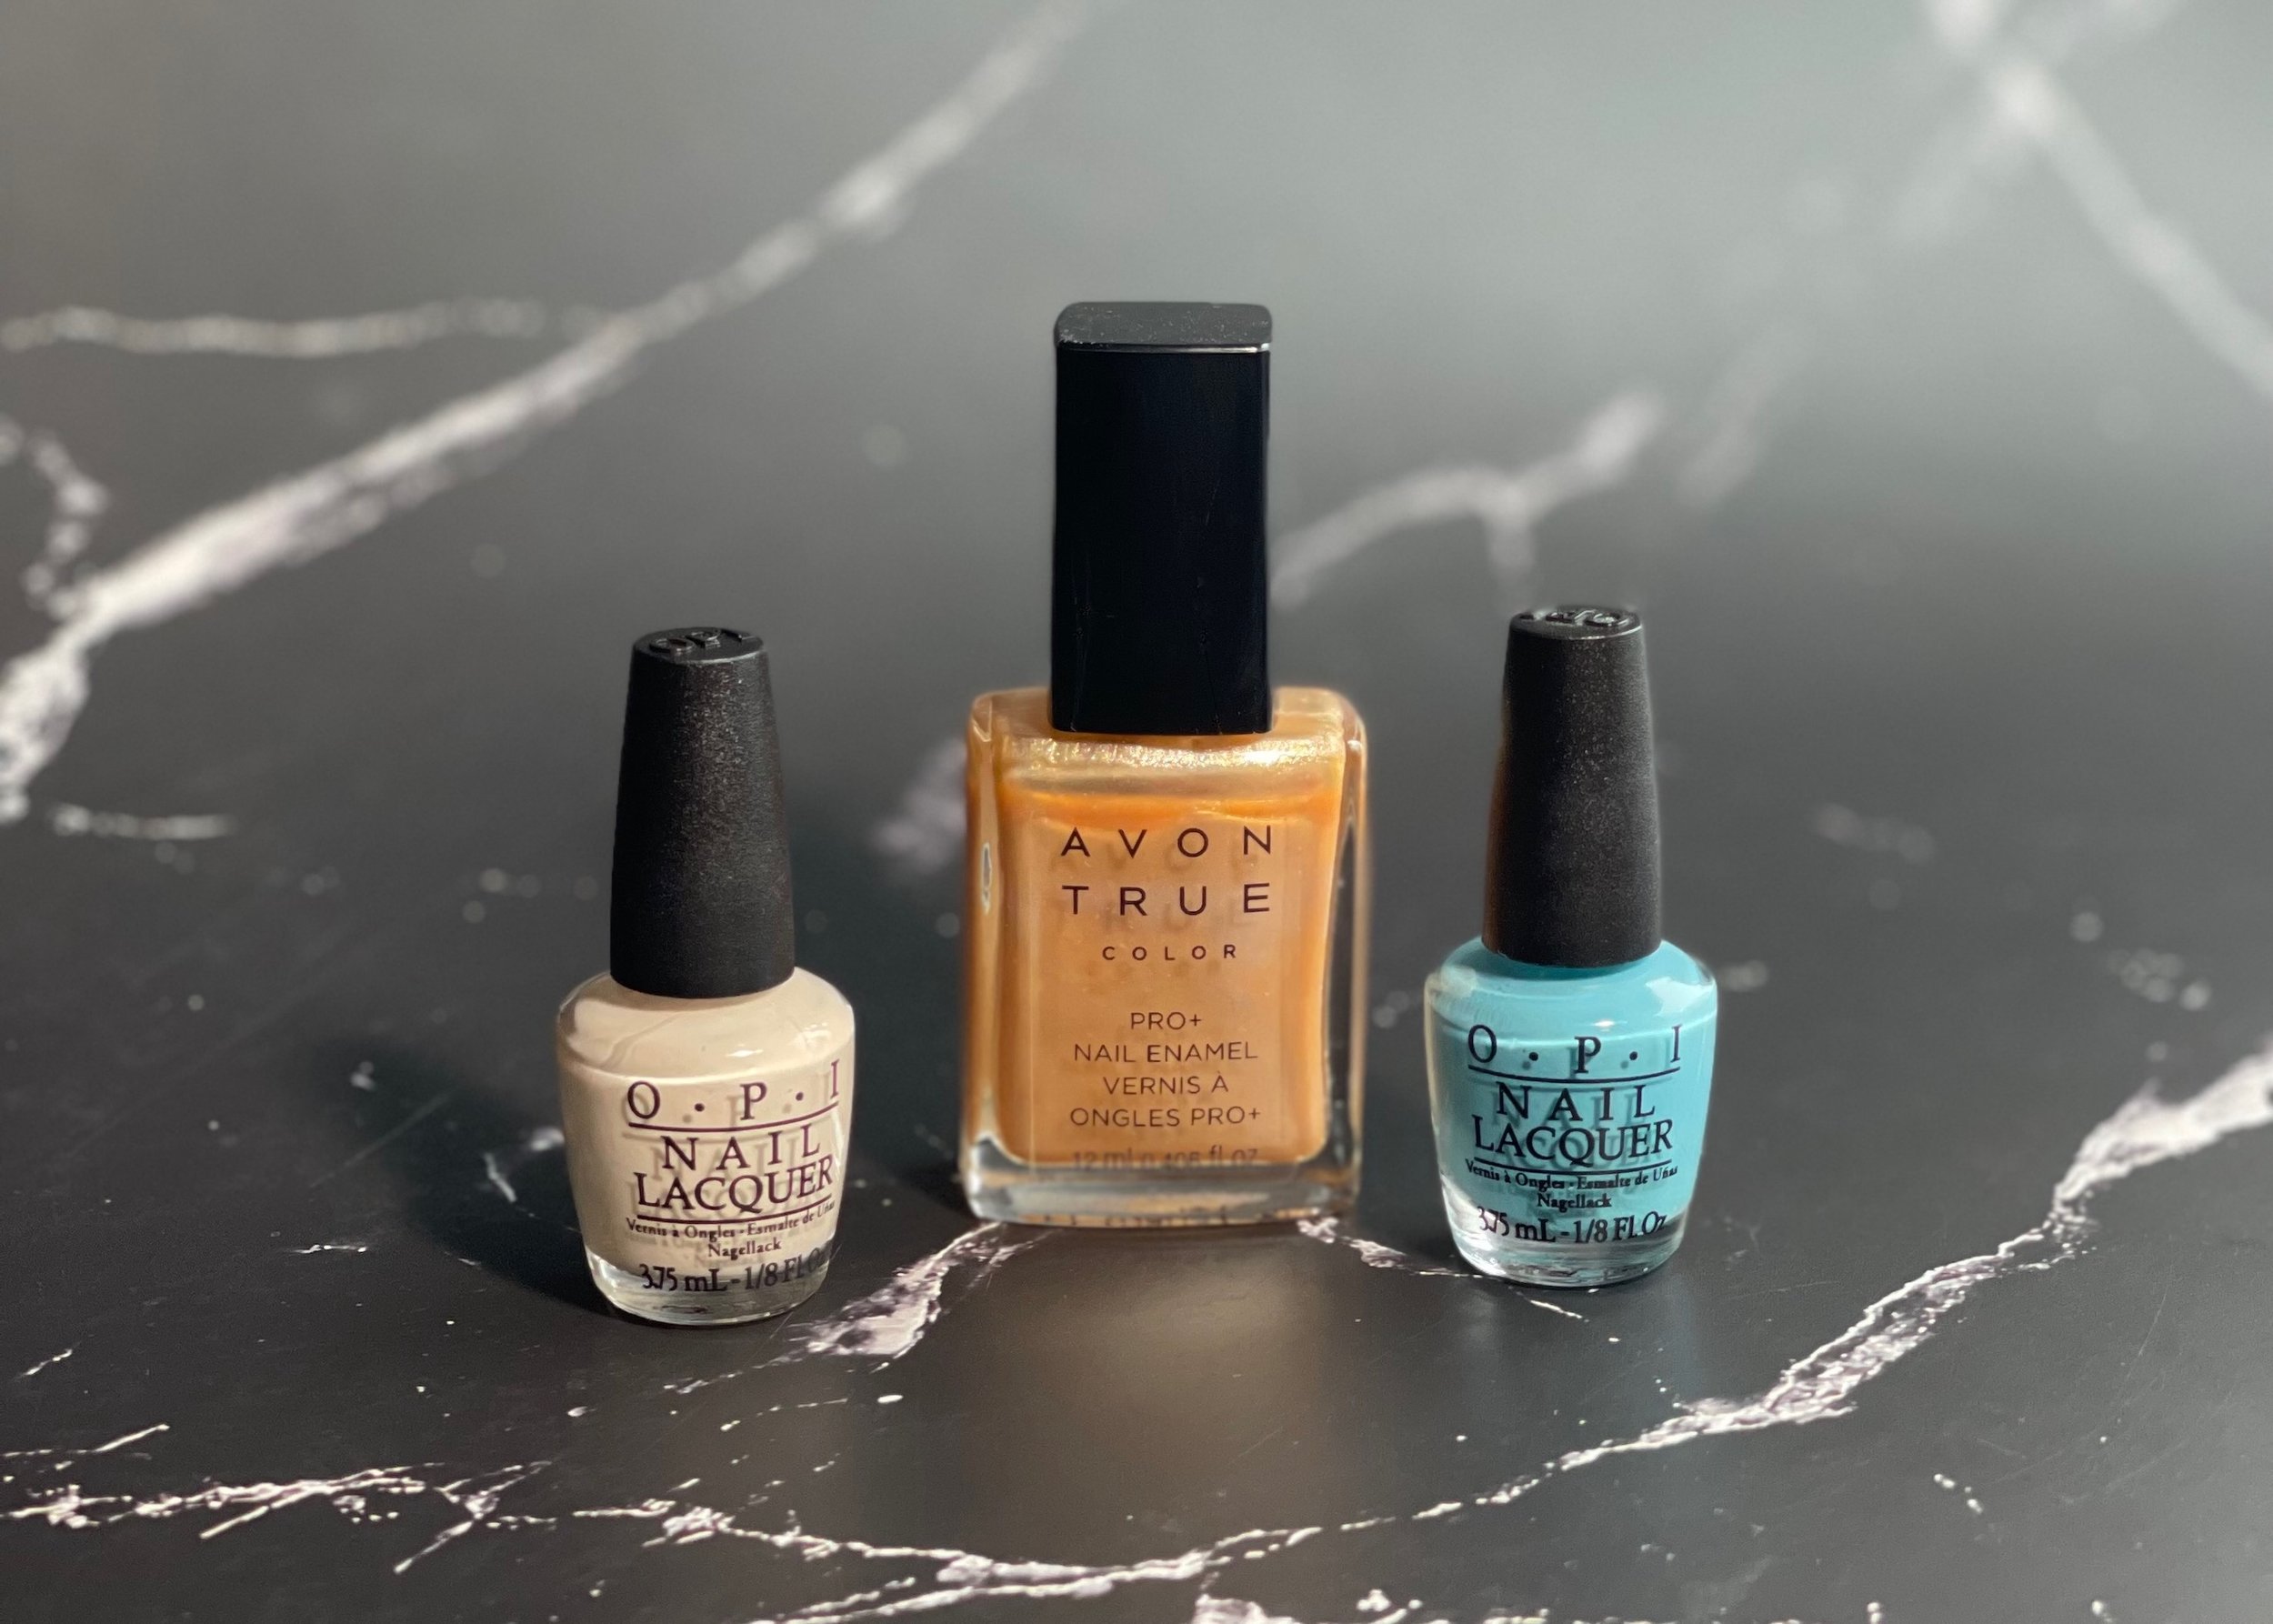 Buy Nothing Project Nail Polish Haul — Lots of Lacquer